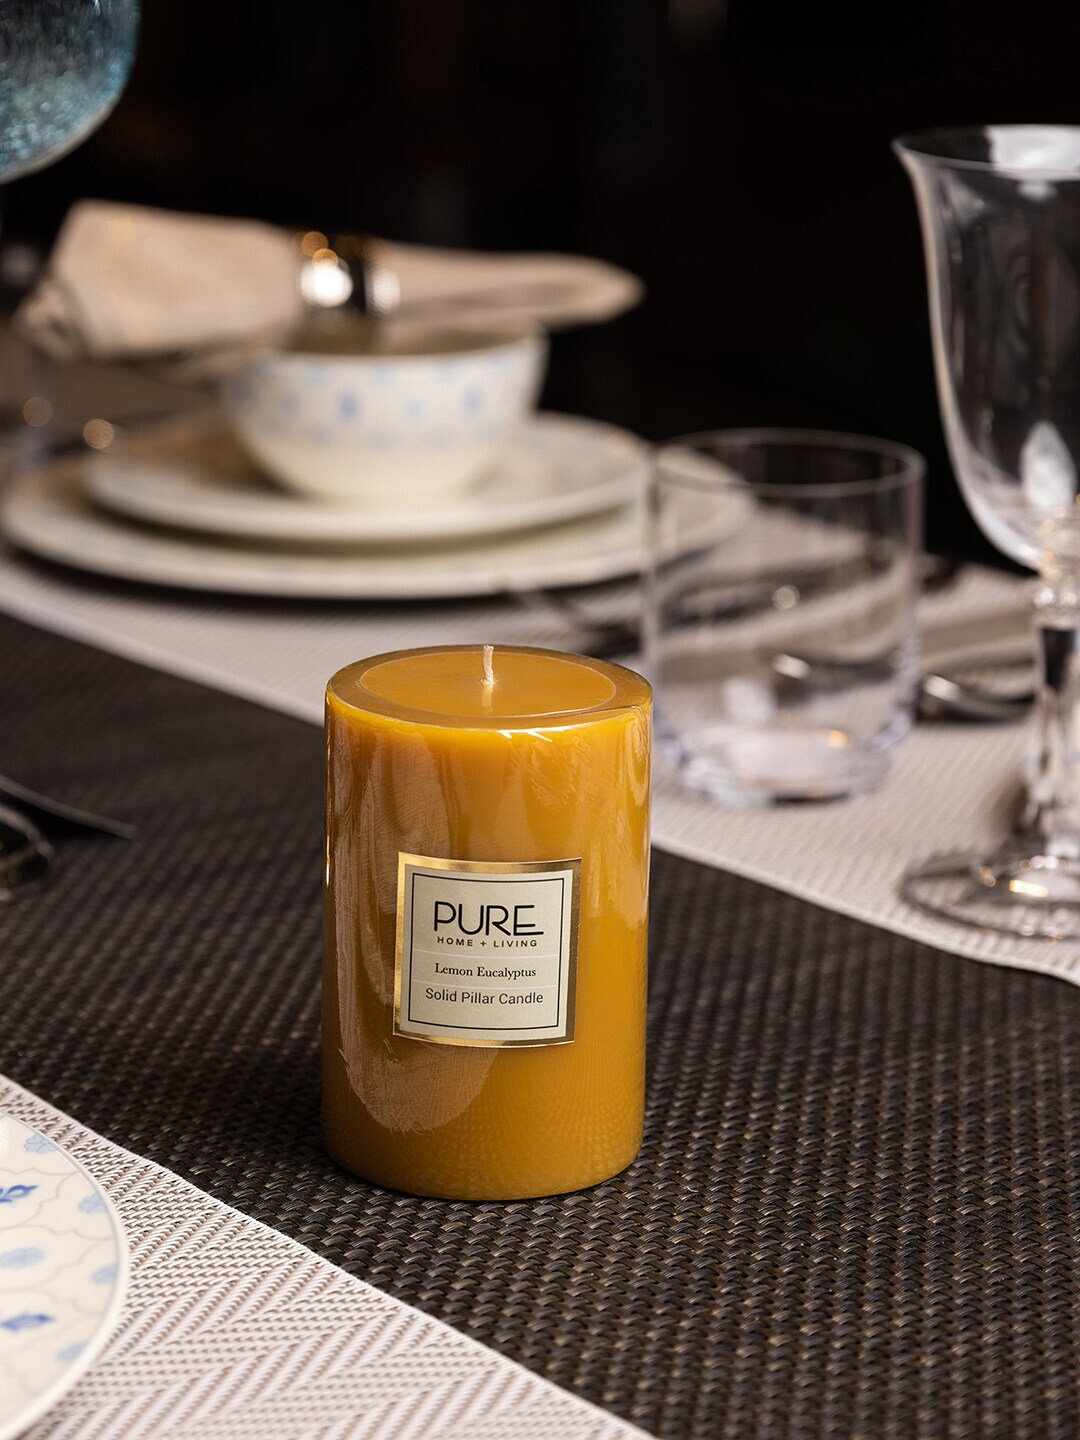 Pure Home and Living Mustard Yellow Solid Pillar Candle Price in India